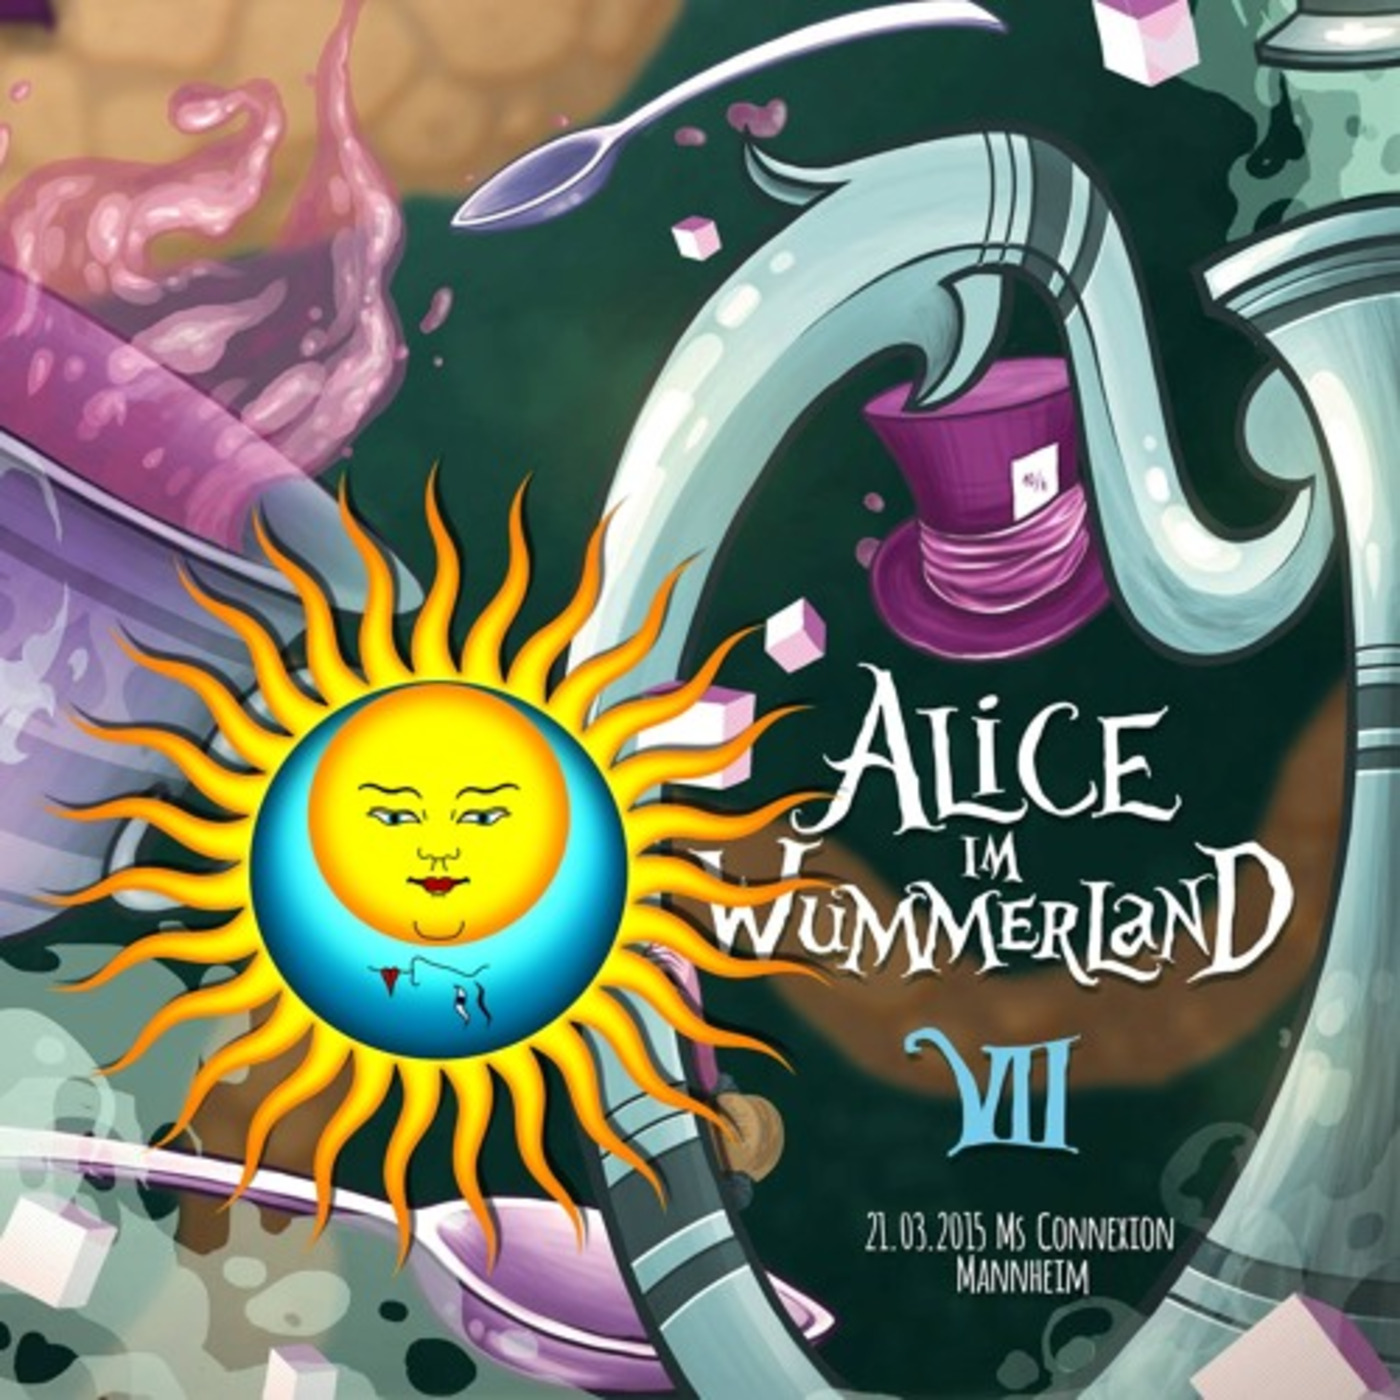 Alice im Wummerland - Chapter VII:hearthis.at